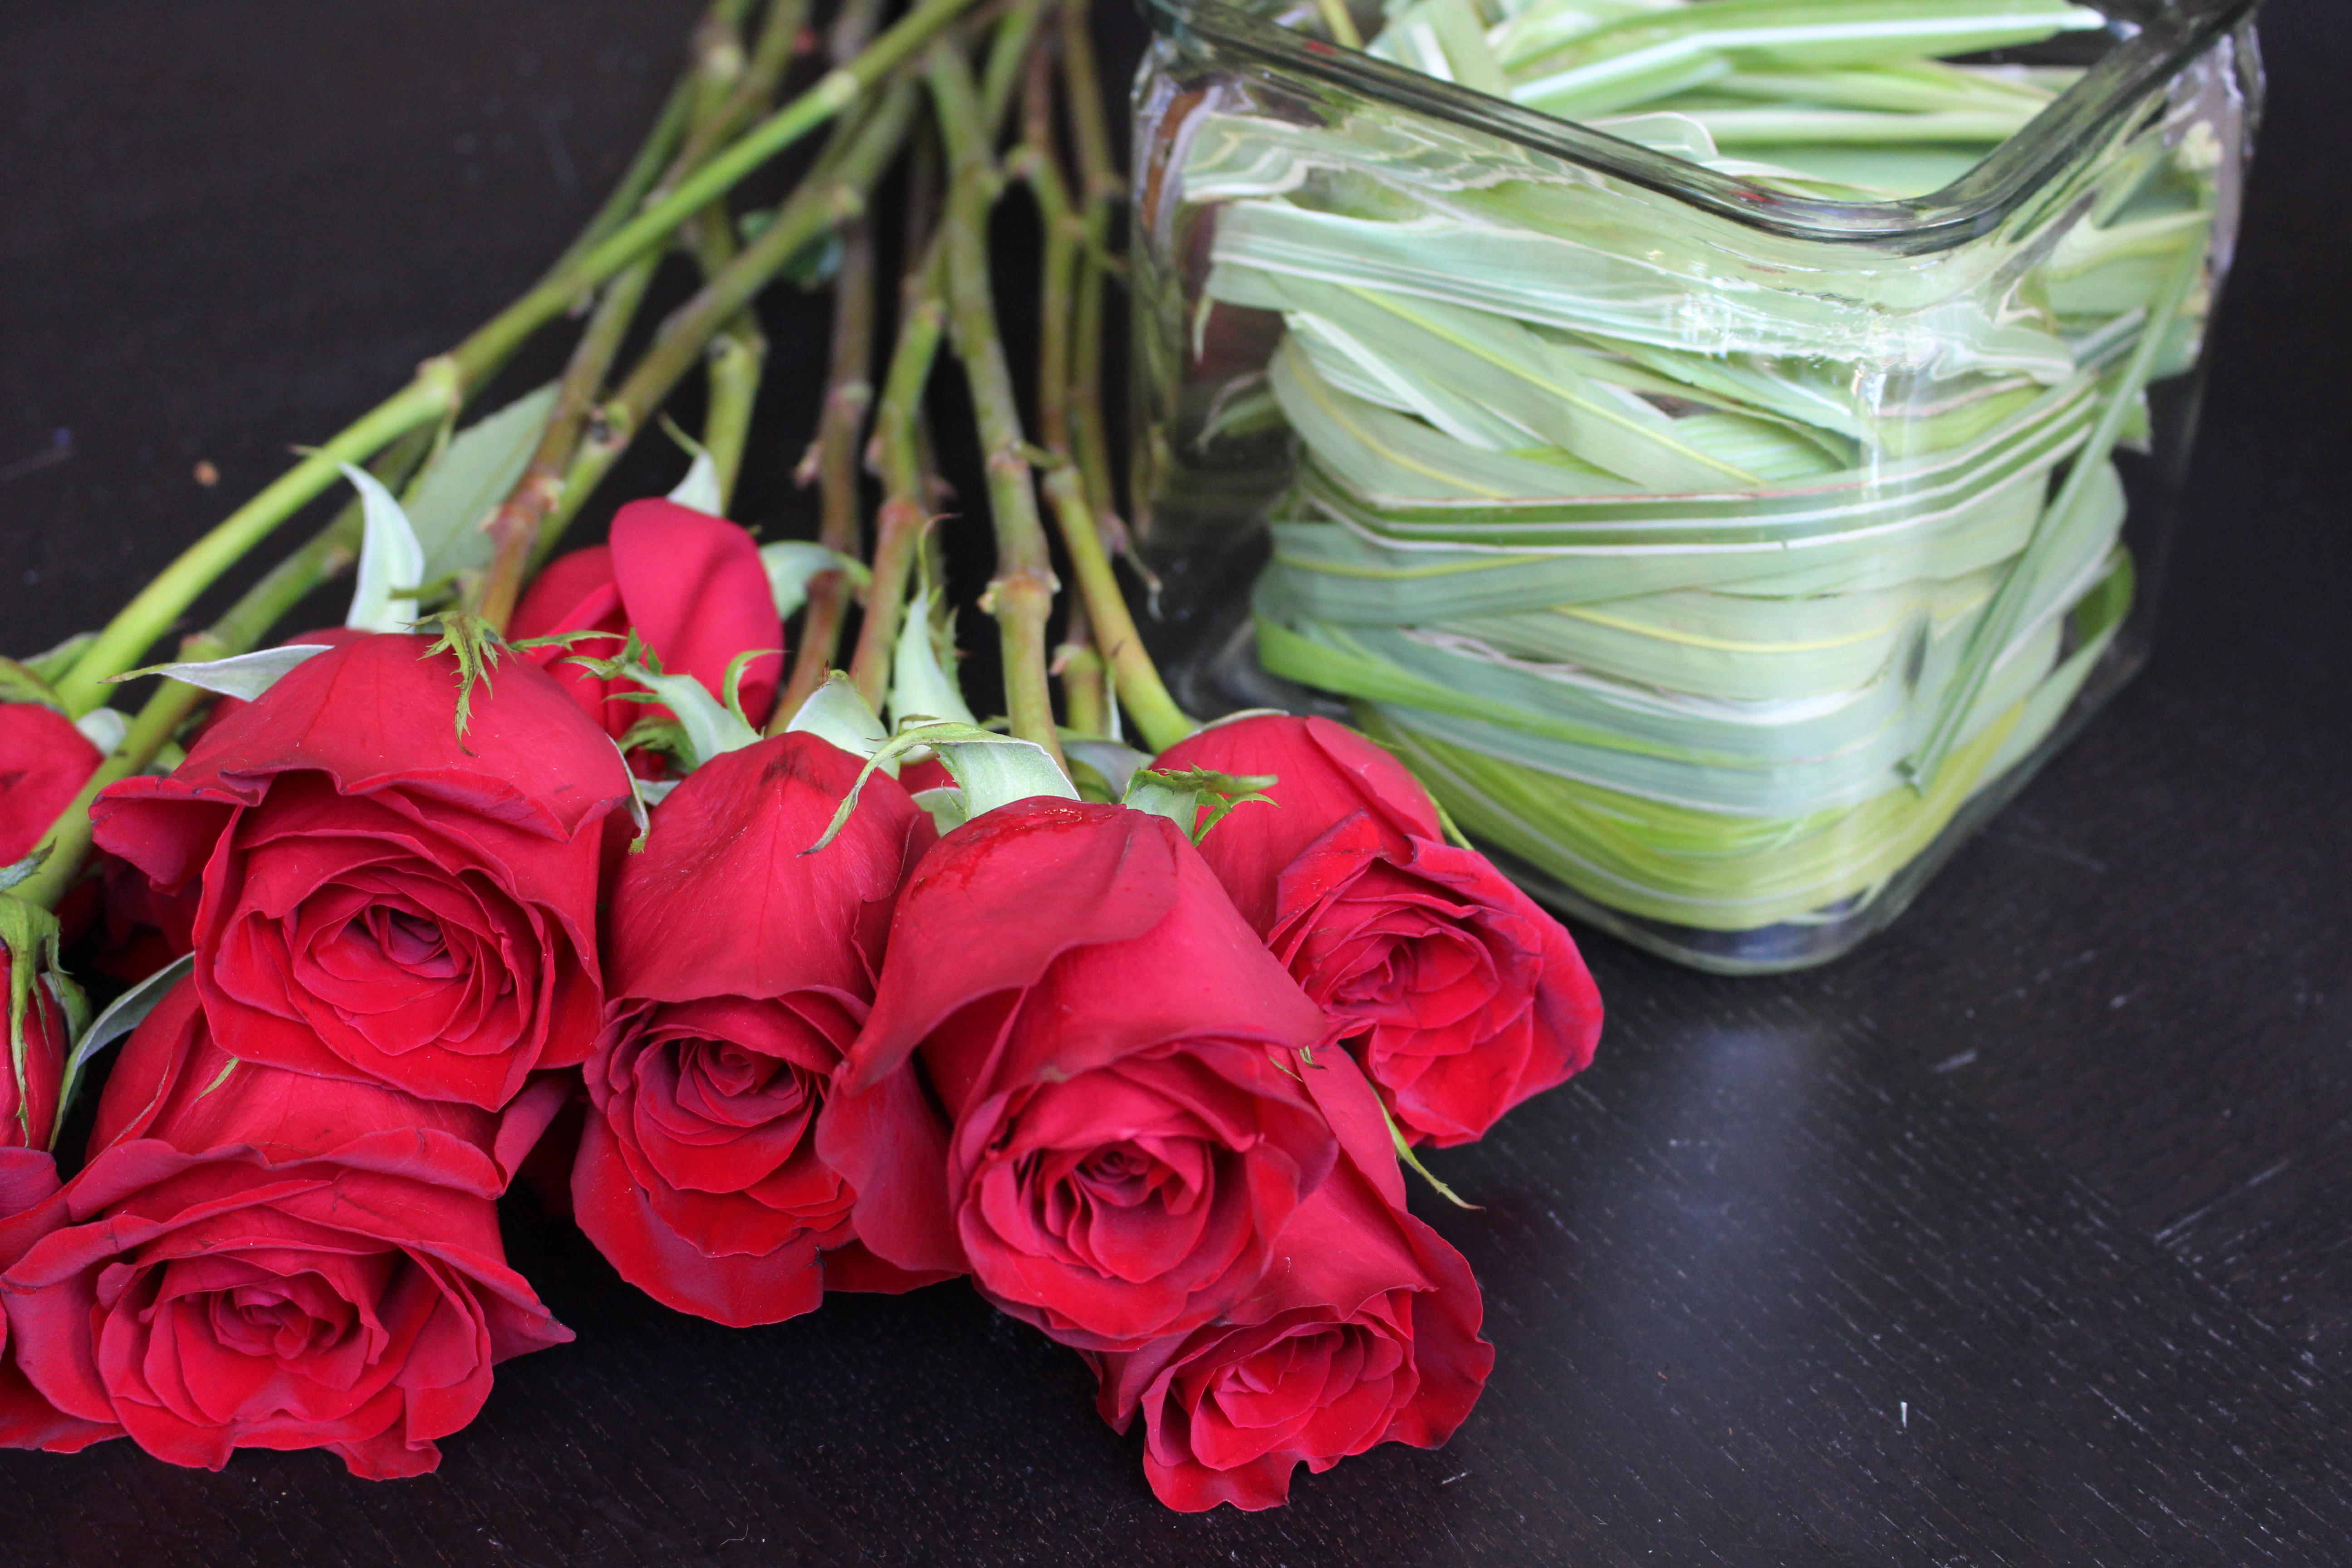 Run for the Roses Flower Arrangement | red roses | flower arranging | rose arrangement | simple flower arranging | hand bouquet | using grocery store bouquets